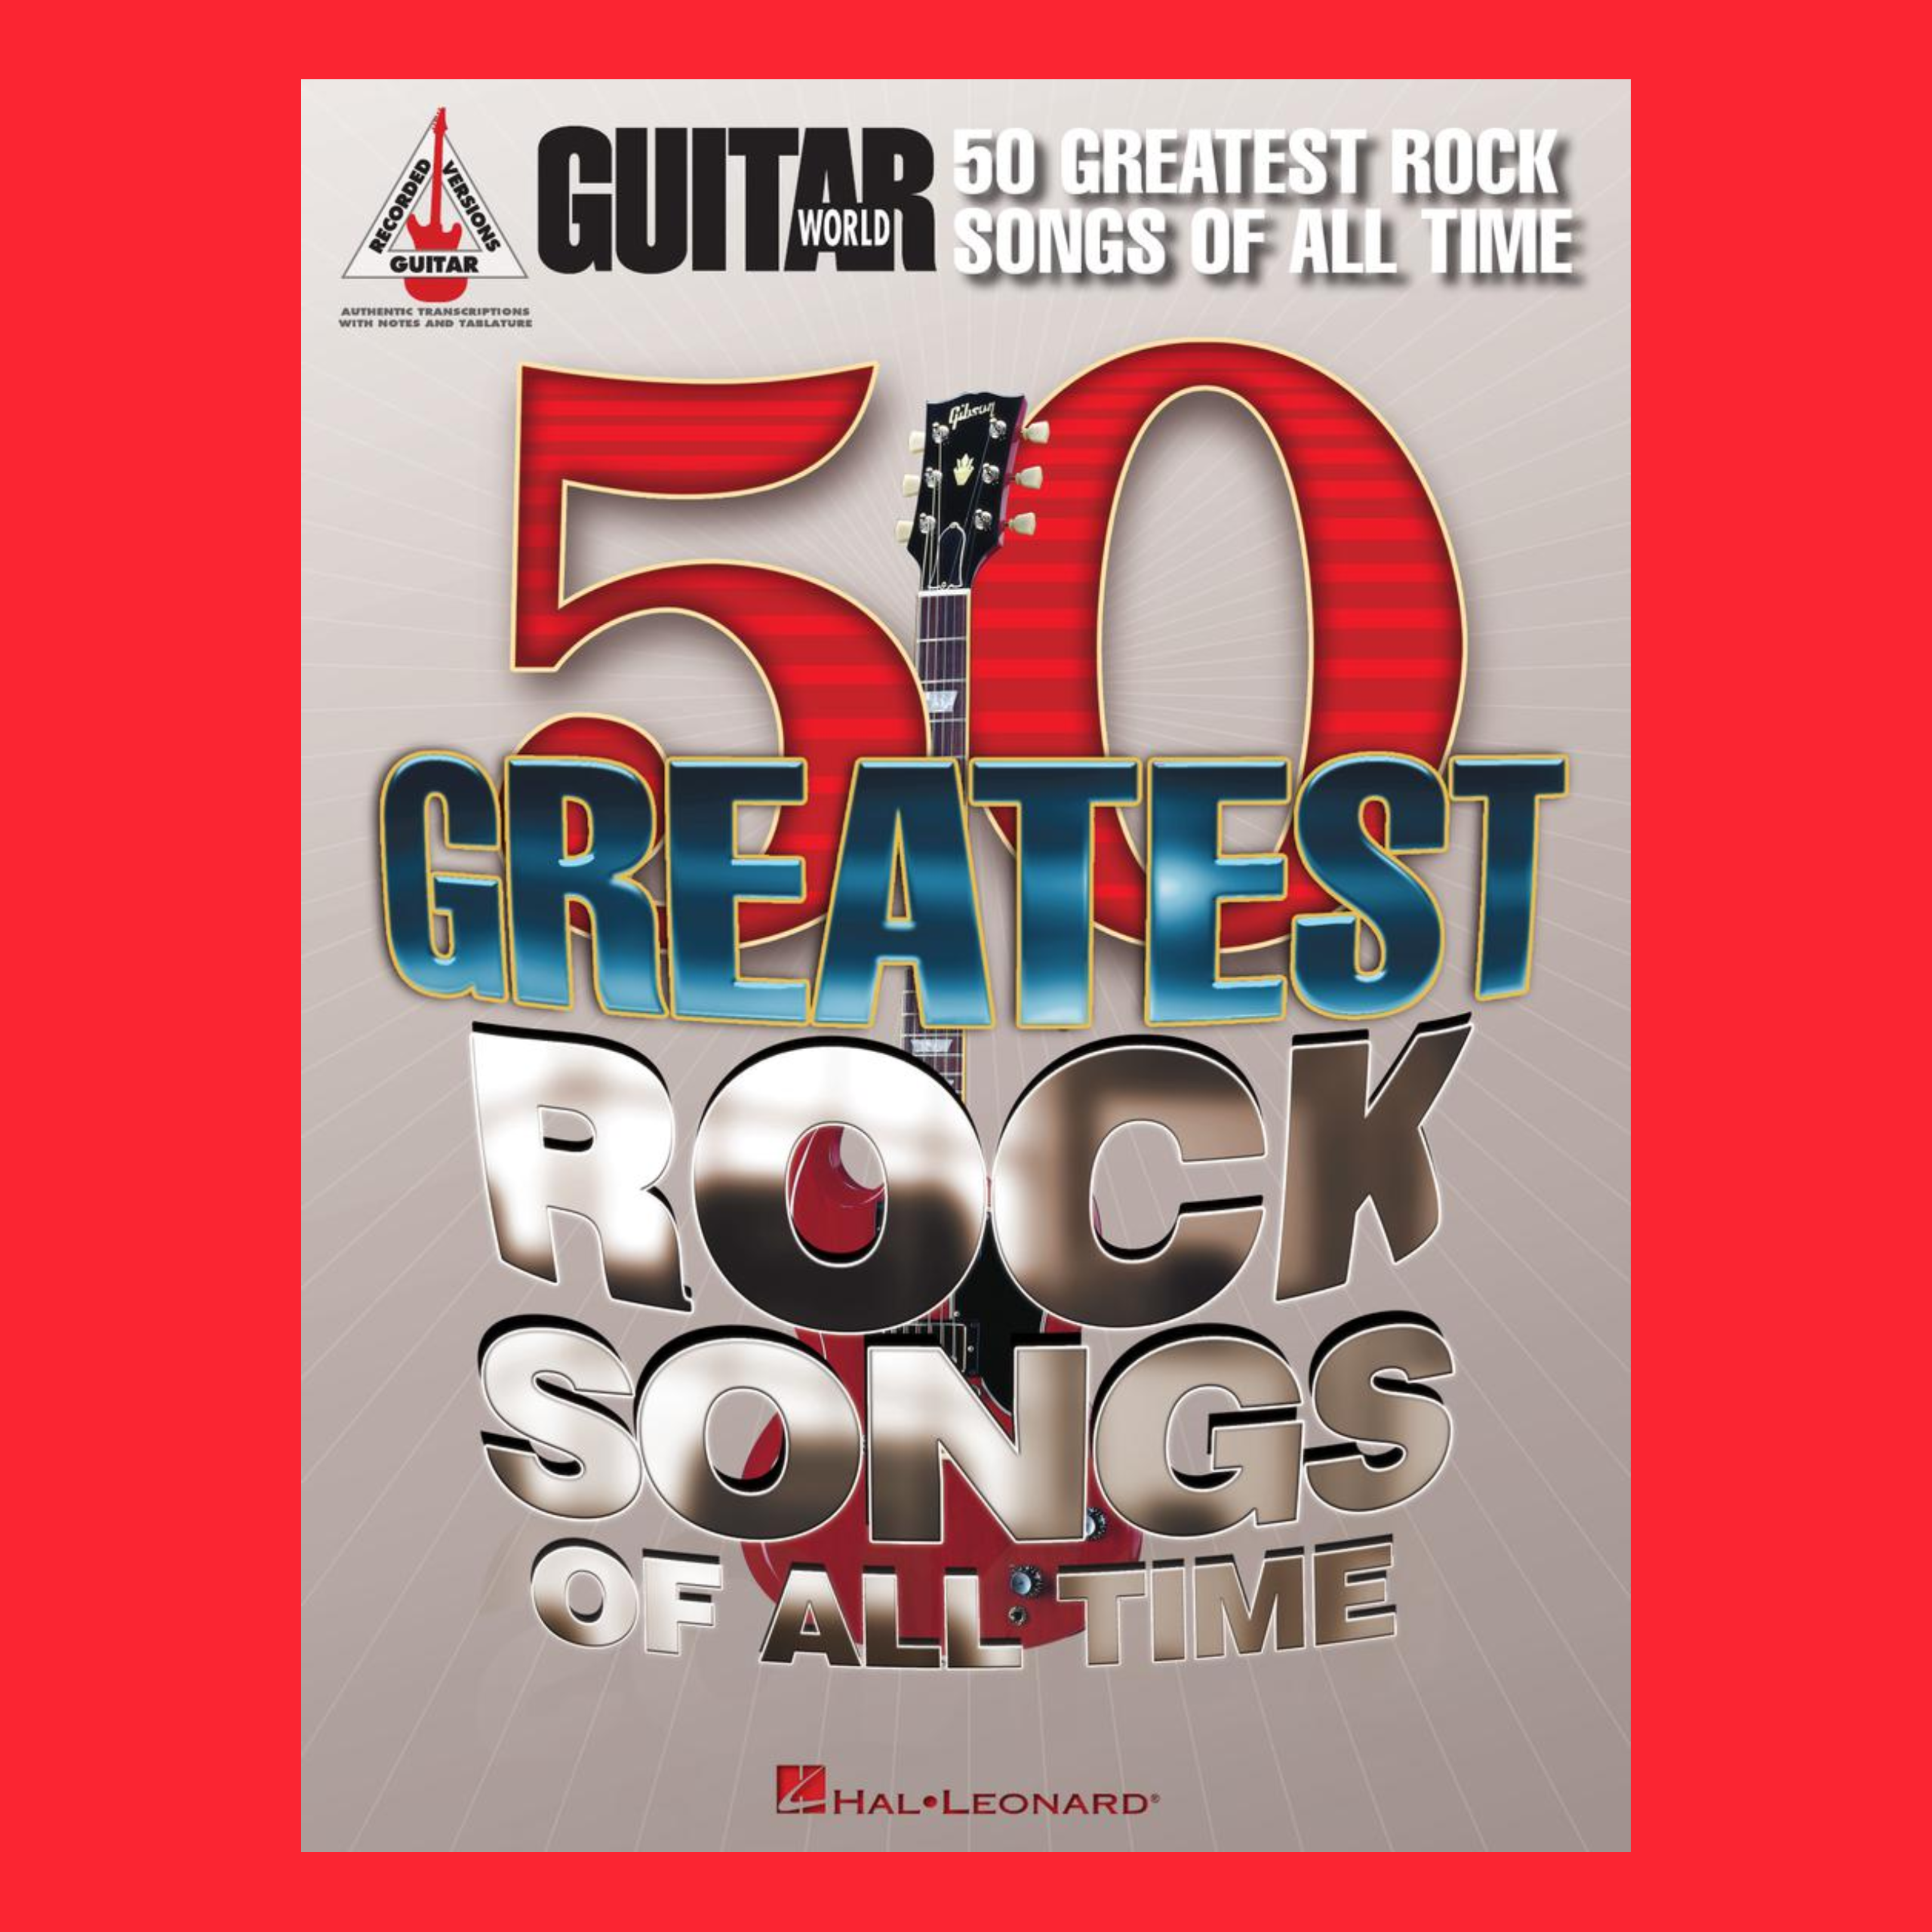 Guitar World's 50 Greatest Rock Songs Of All Time Book 512 pages – 